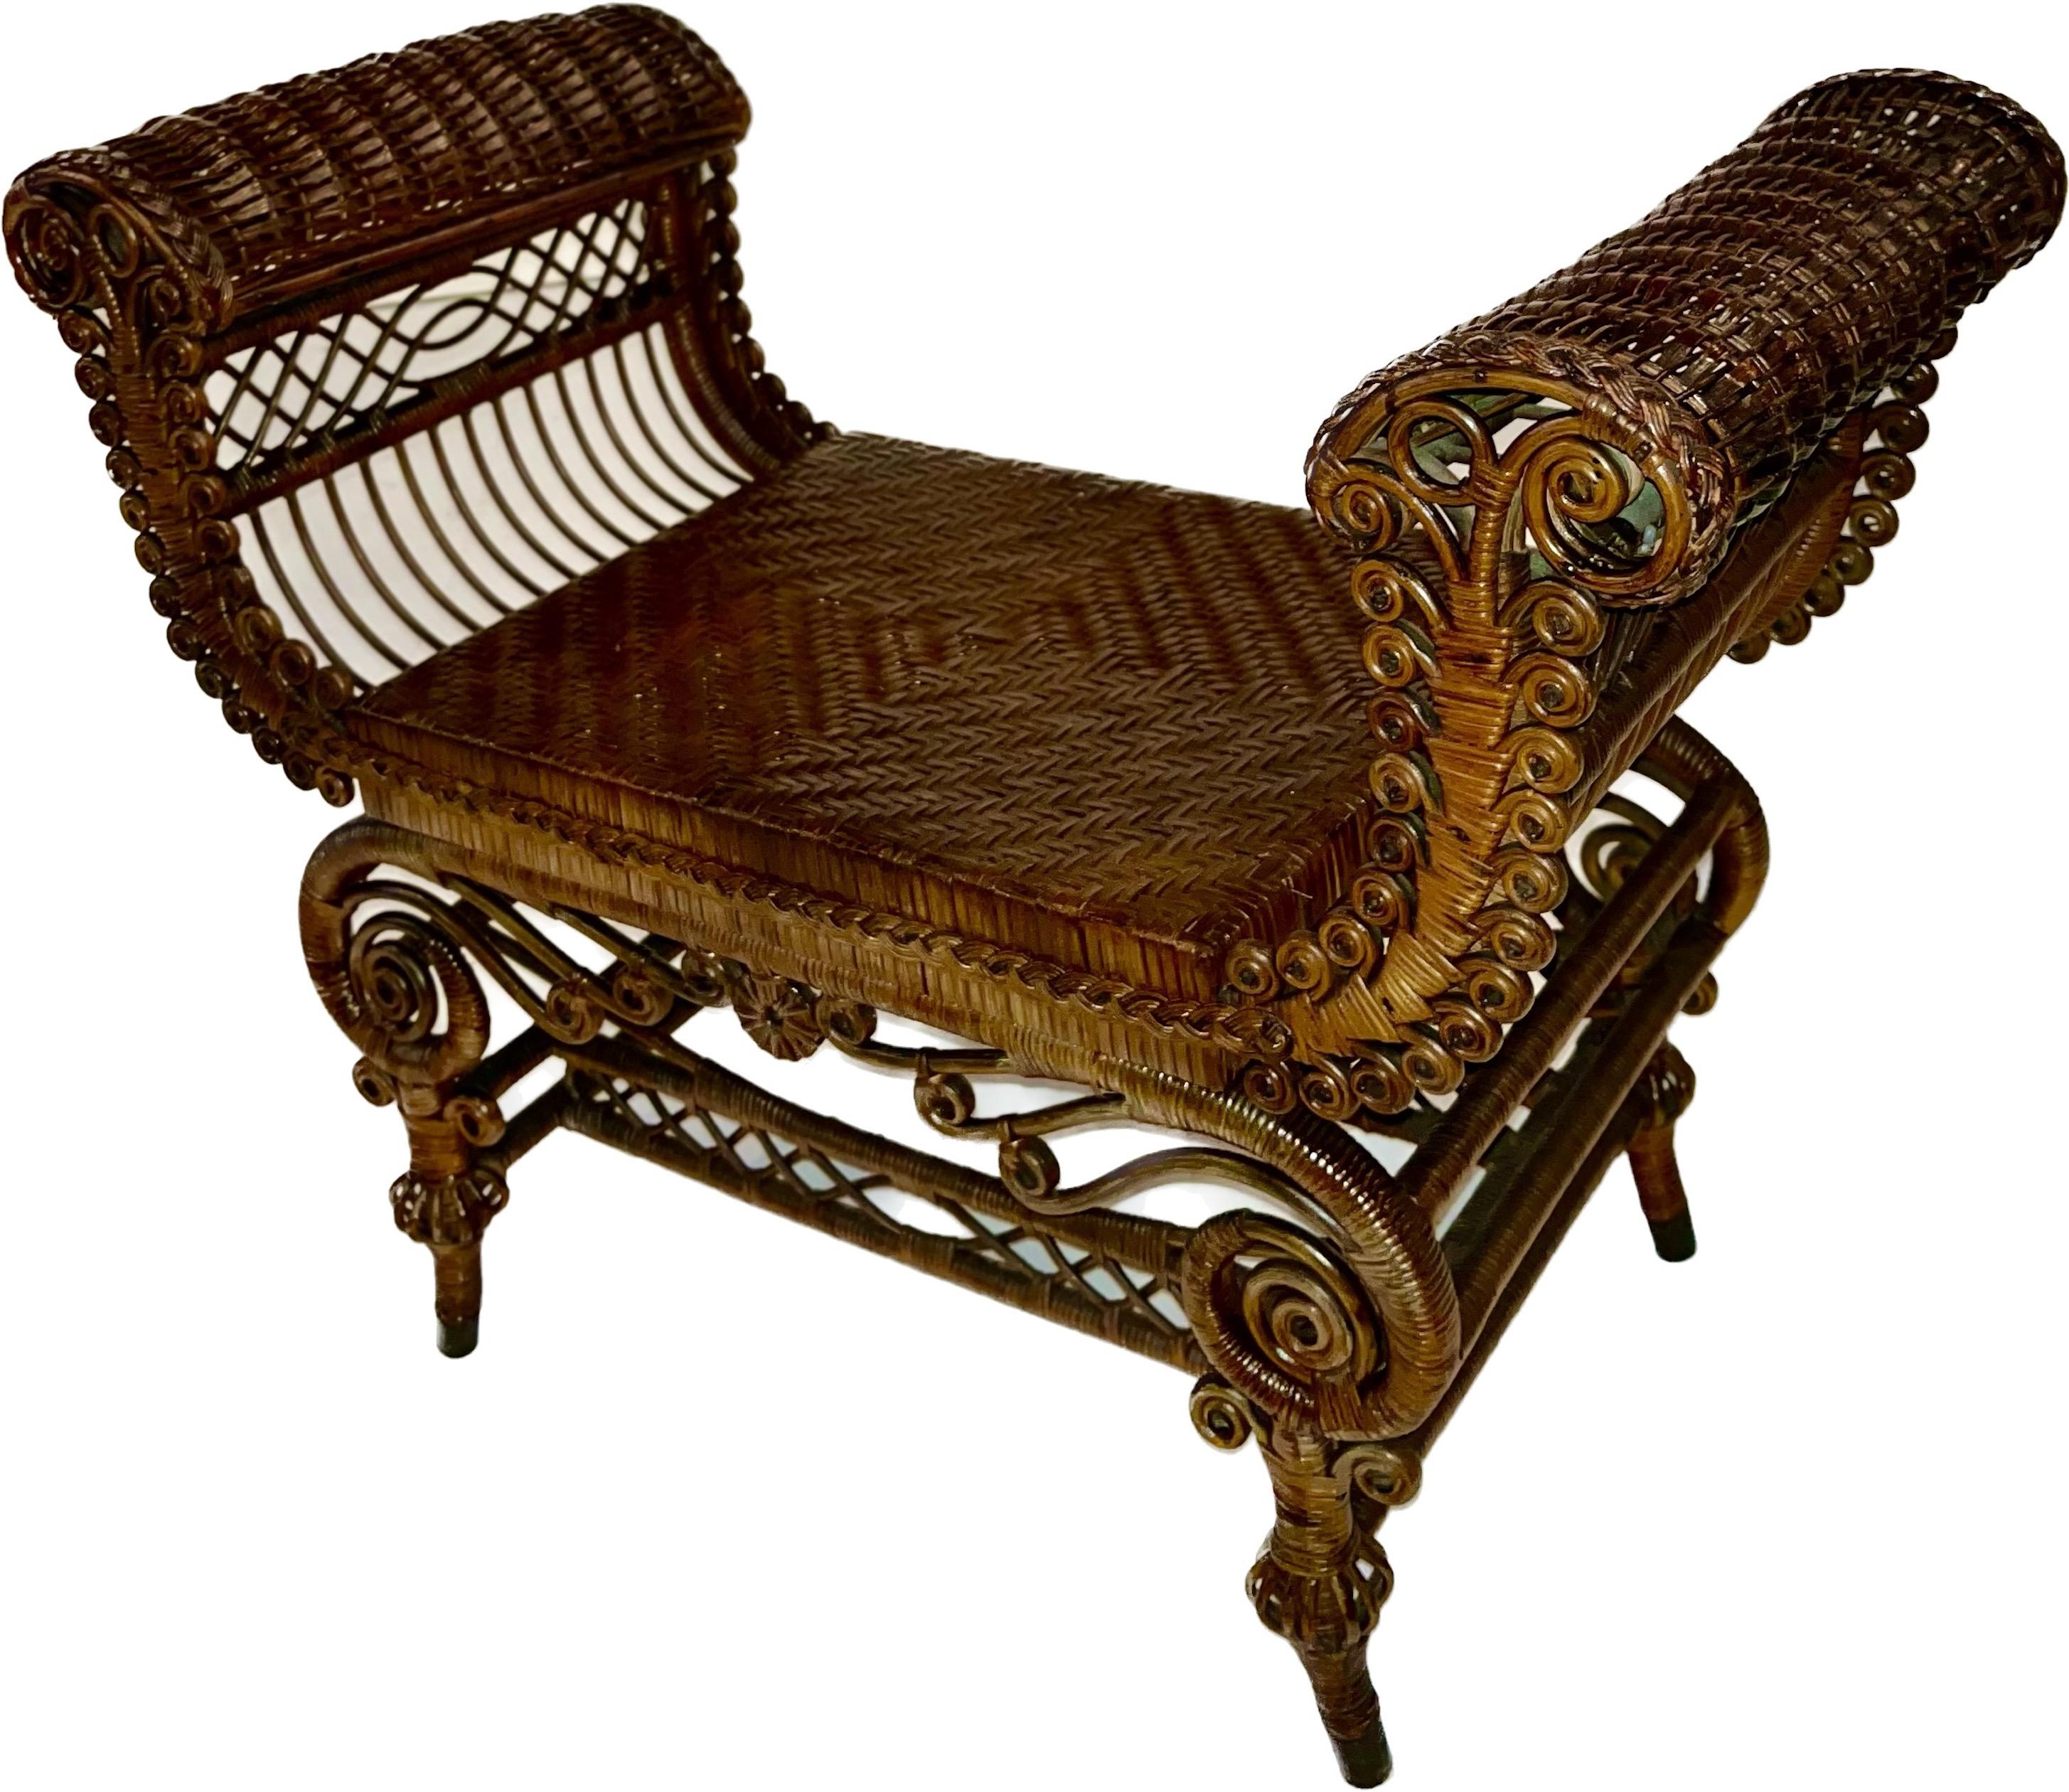 A very rare Antique Wicker Turkish Bench in natural finish designed and made by the Wakefield Rattan Company, Wakefield ,Massachusetts C.1890. This wonderful wicker bench is a glowing example of the golden age of wicker furniture. Its over the top